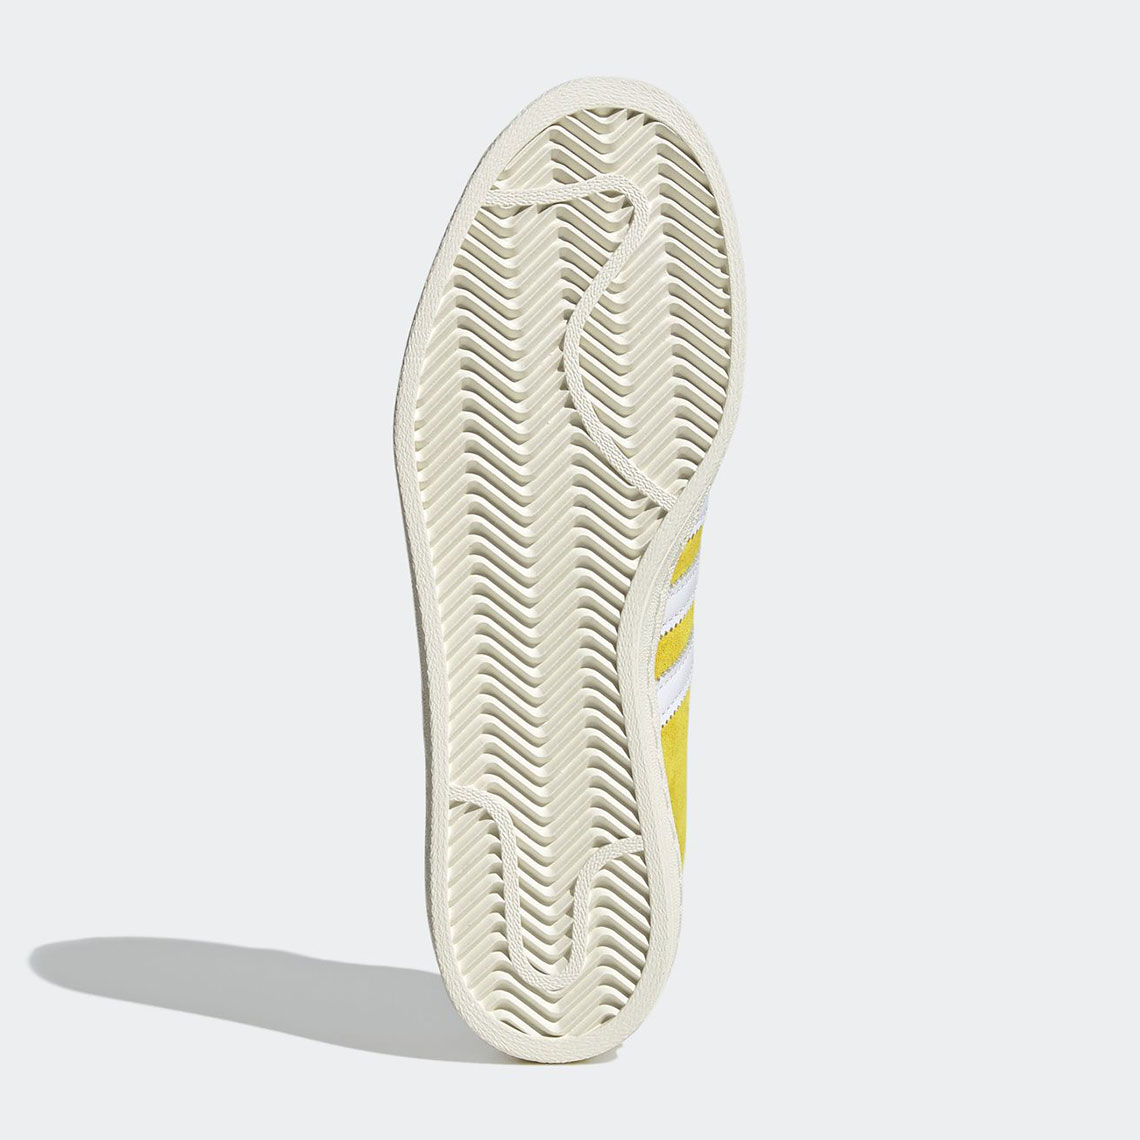 Adidas Campus 80s Bold Gold Cloud White Yellow Fx5443 7